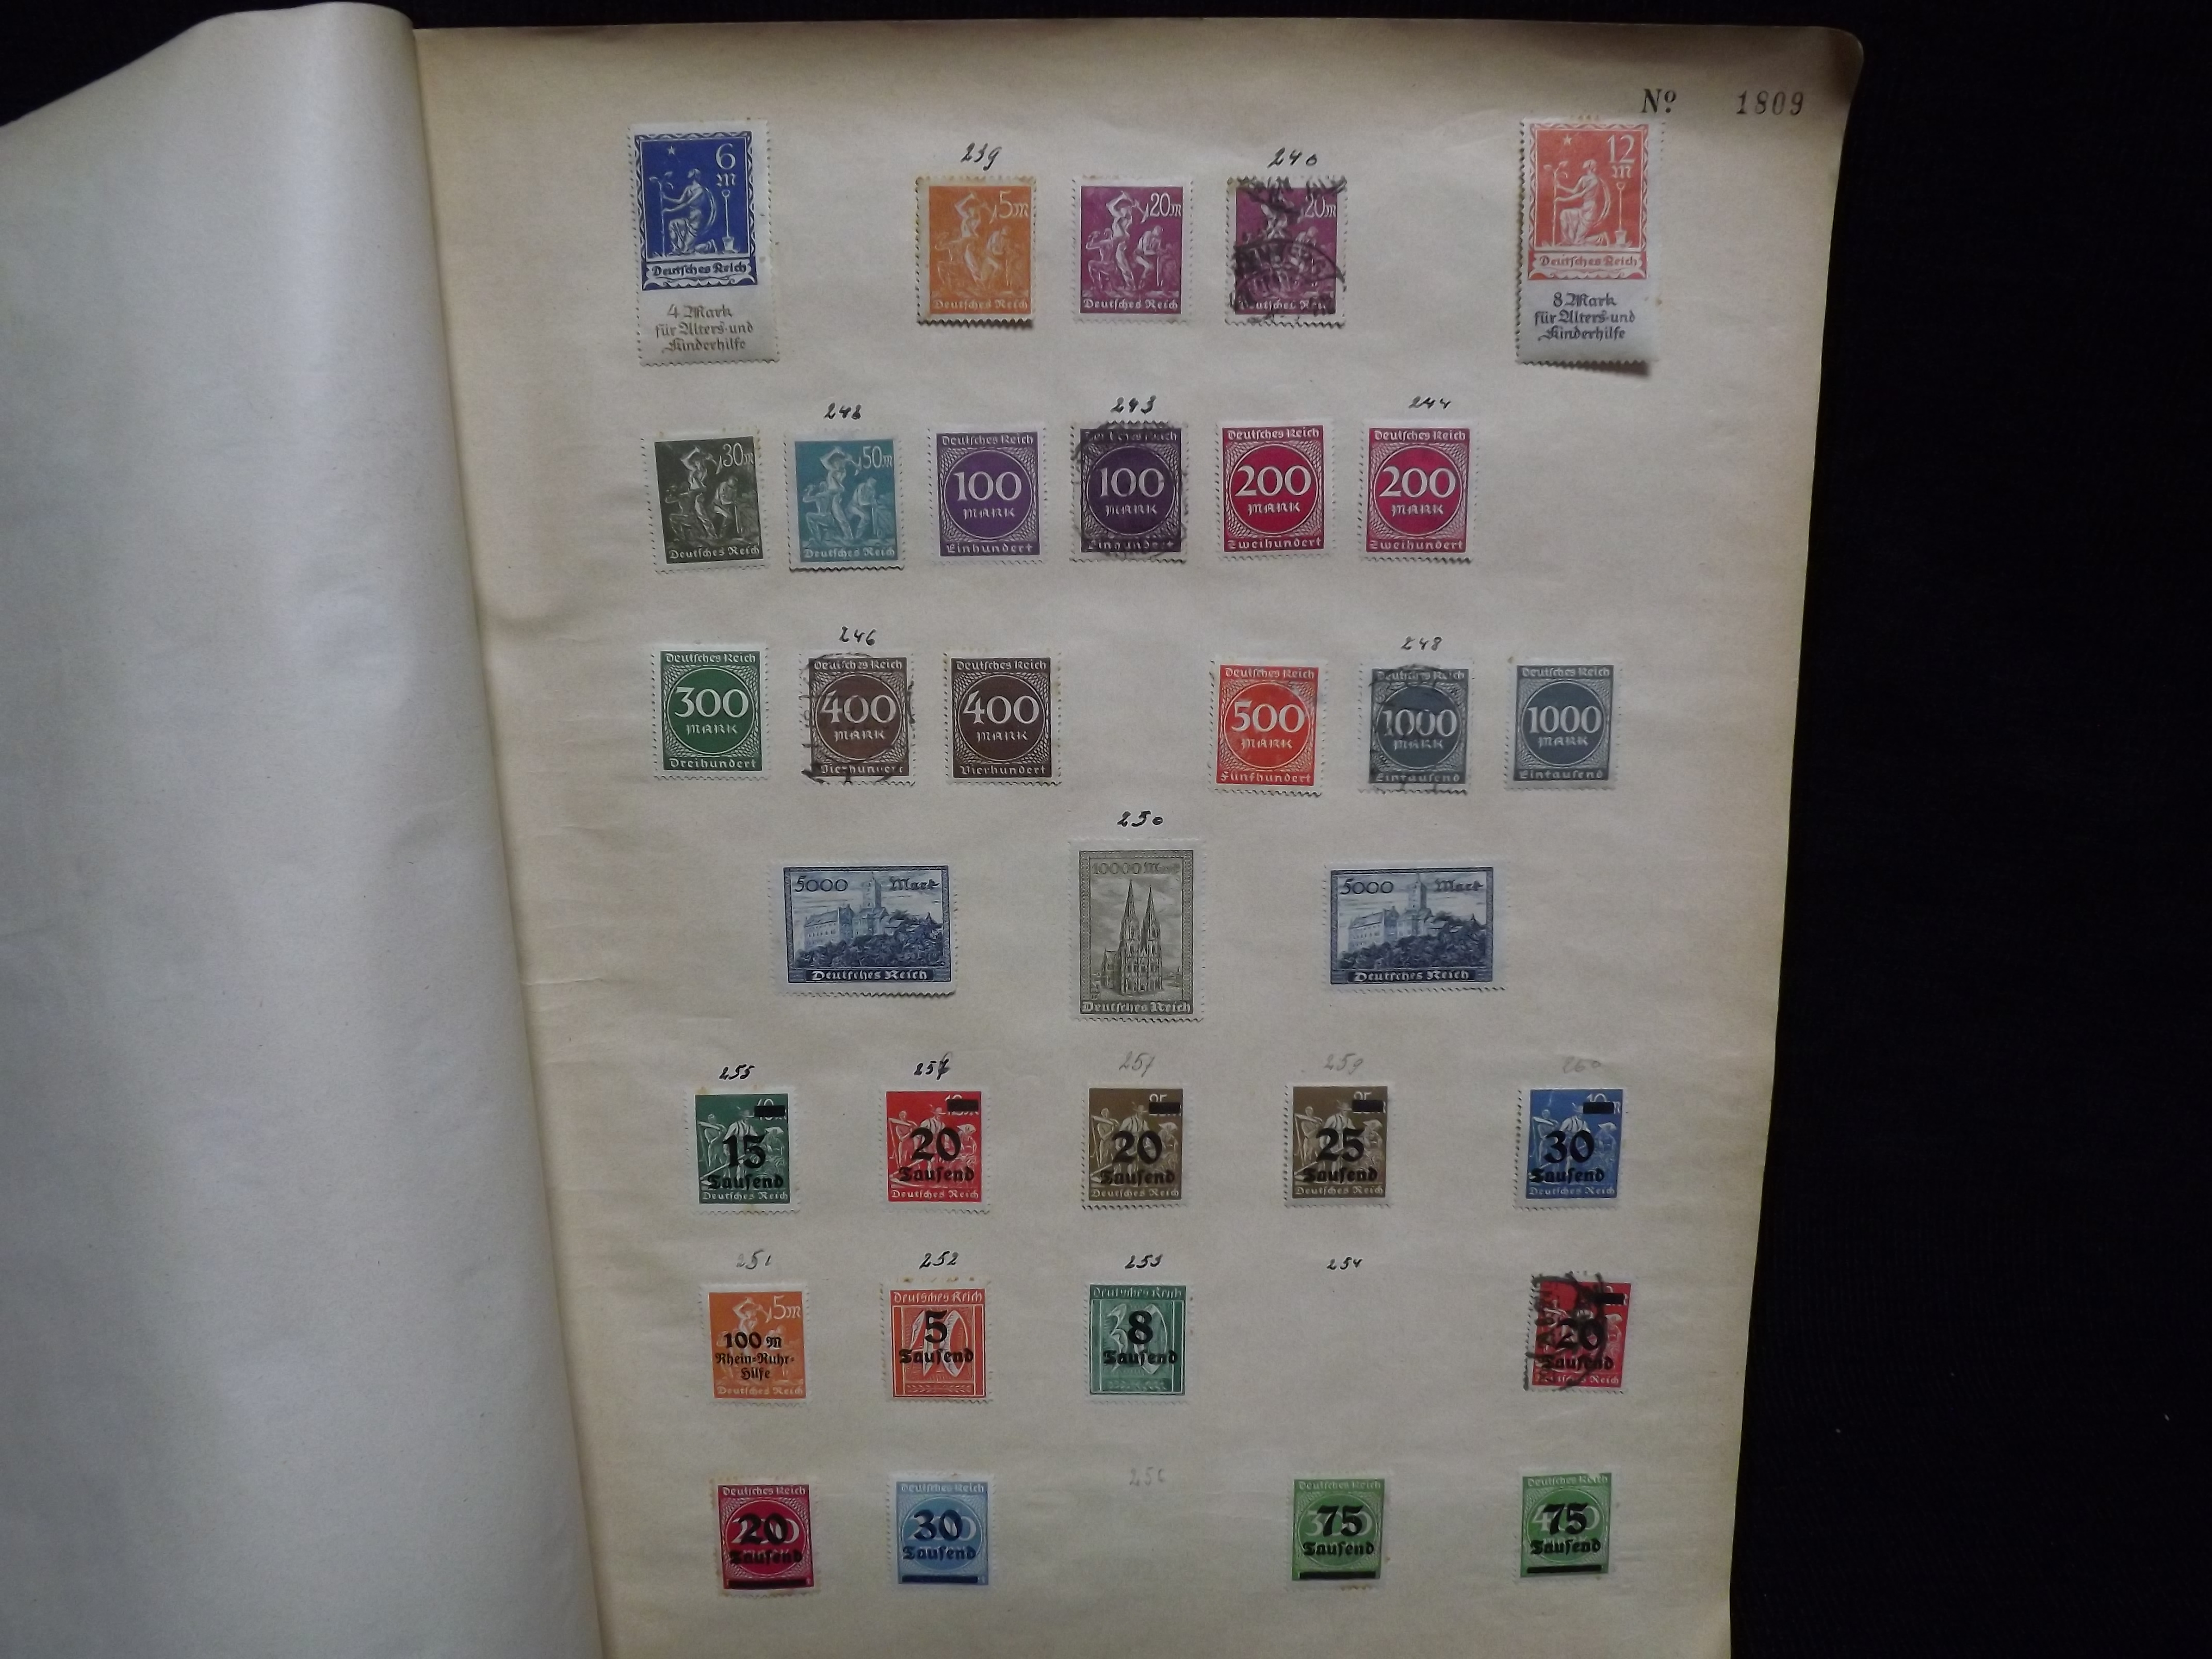 Over 500 x German Used & Mint Postage Stamps. Housed in old ledger page Album. Includes various - Image 6 of 30